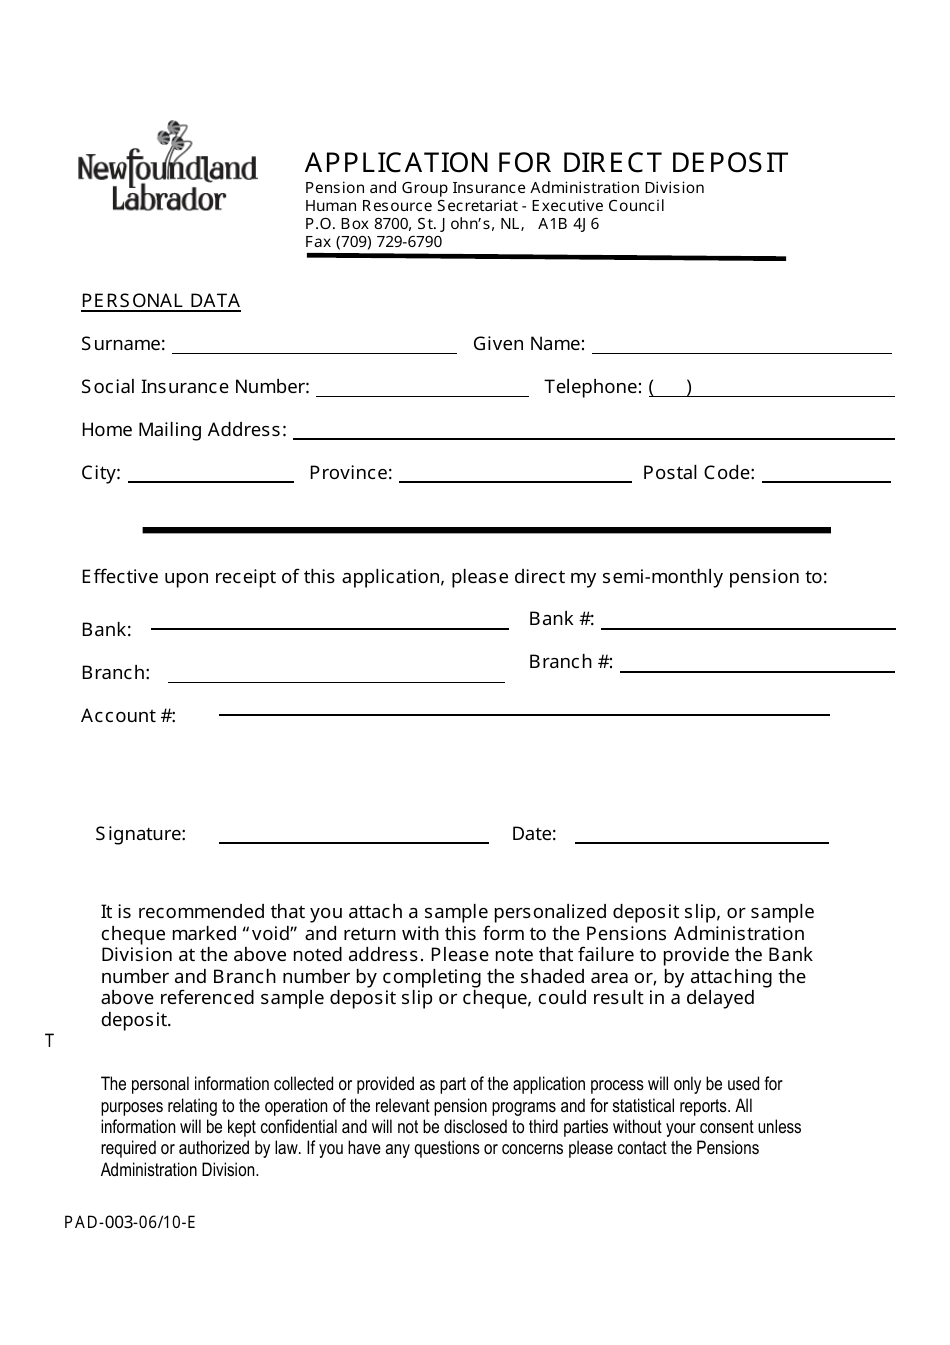 Form PAD-003 Application for Direct Deposit - Newfoundland and Labrador, Canada, Page 1